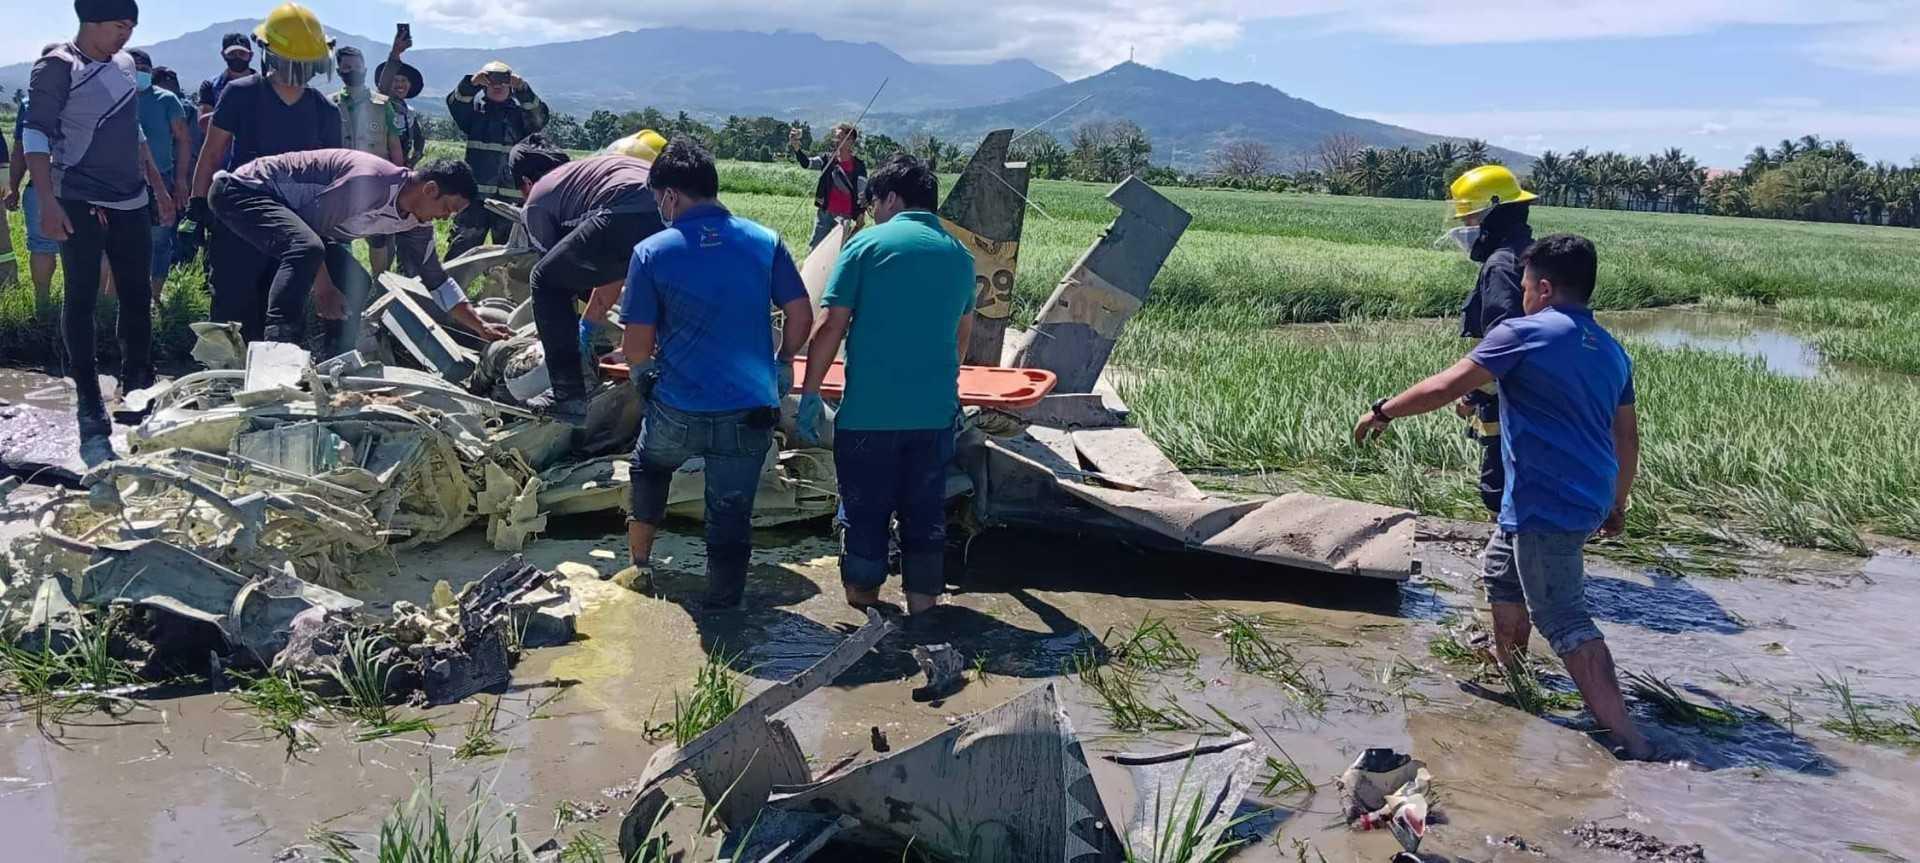 A handout photo from the Bureau of Fire Protection Region II taken and released on Jan 25 shows rescuers retrieving a body from a crashed plane in Pilar, Bataan, where two Philippine air force aviators were killed. Photo: AFP